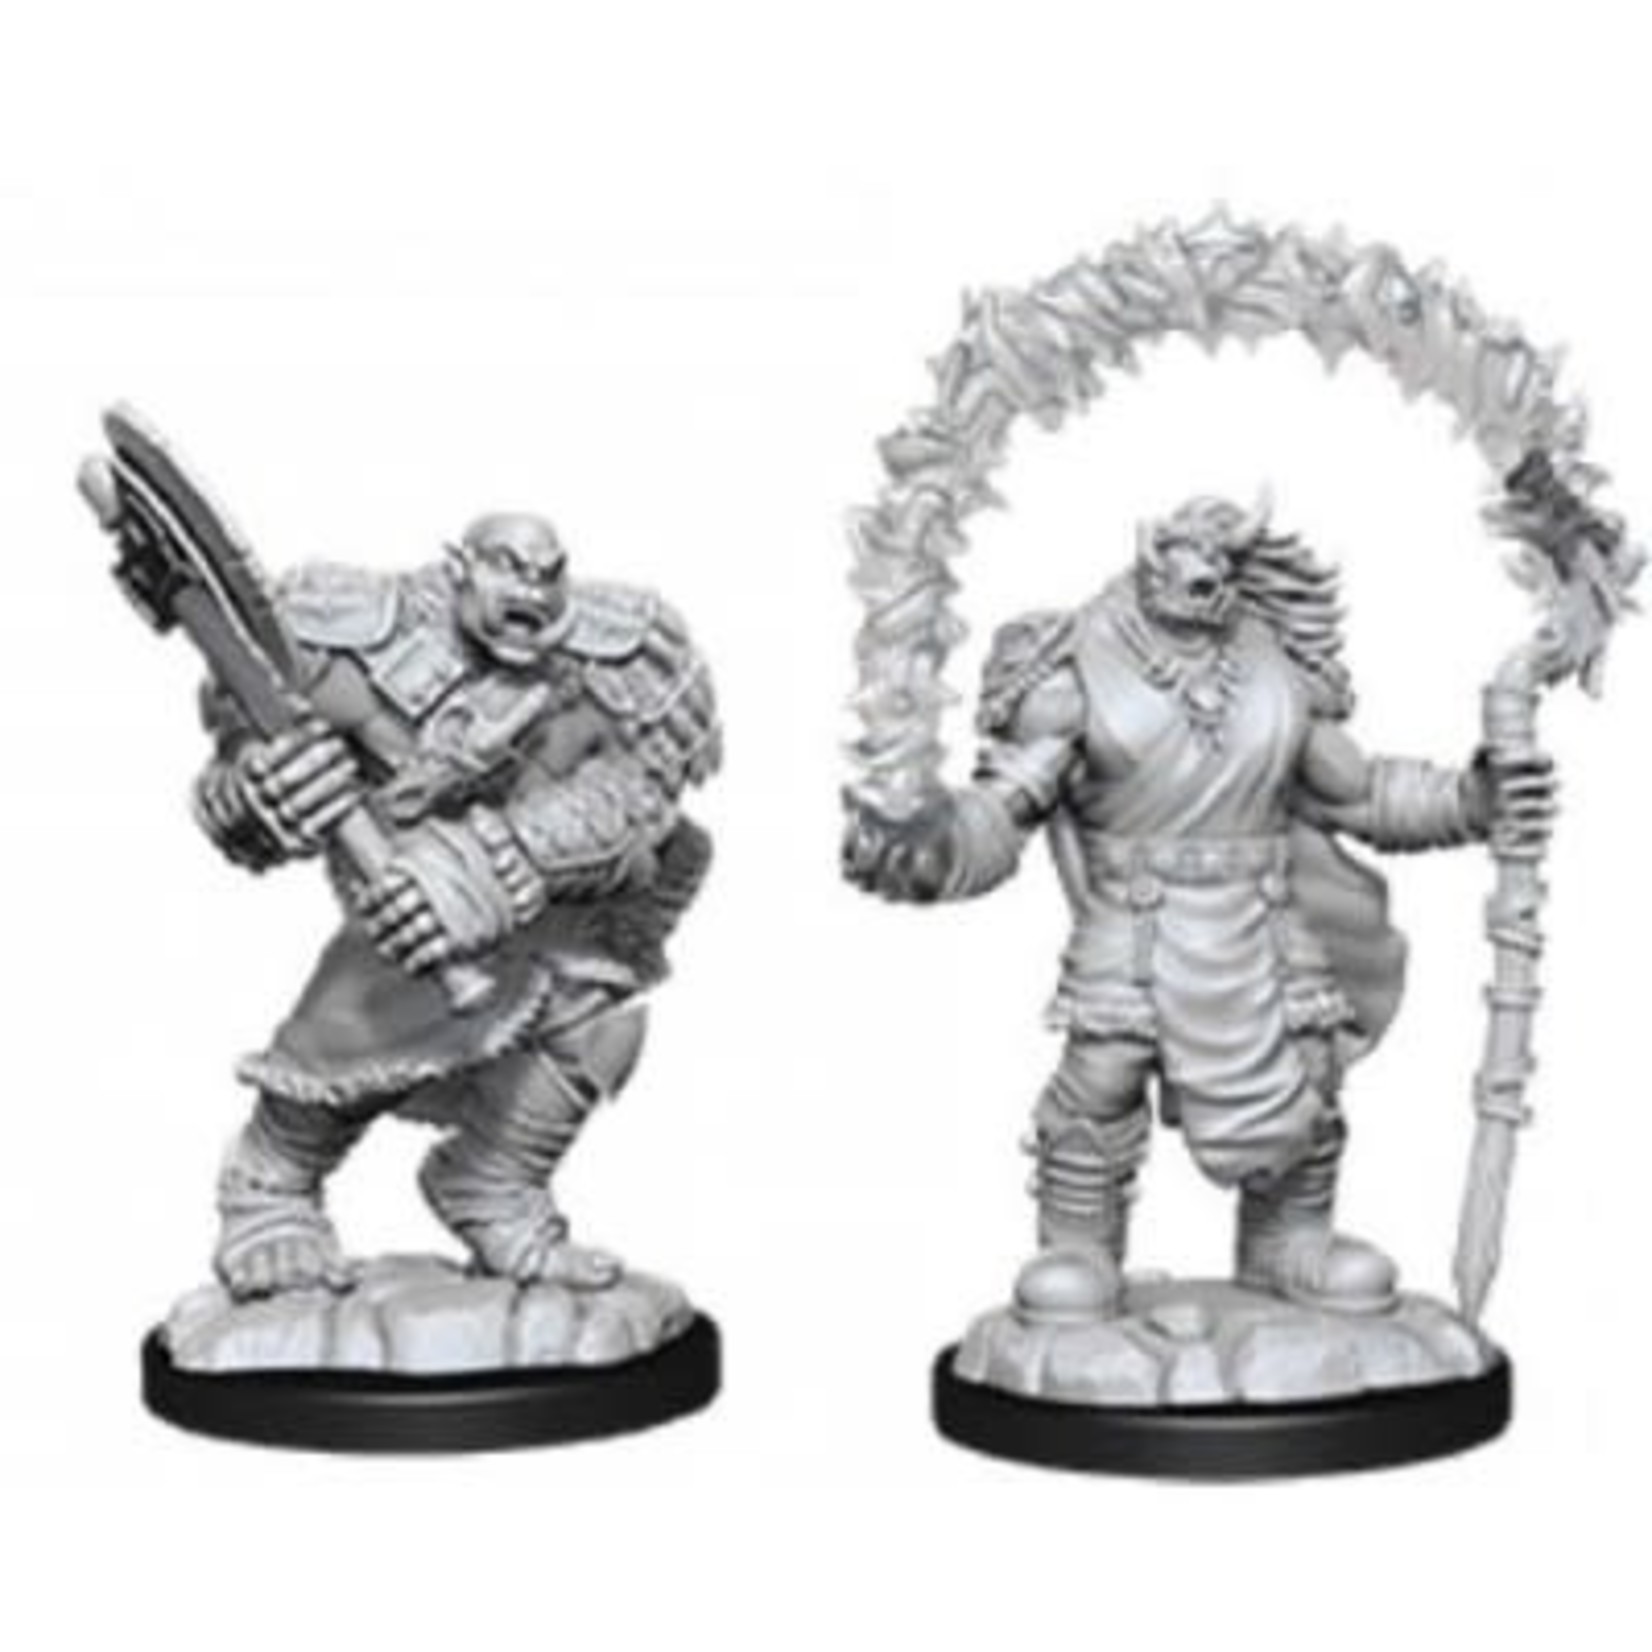 WizKids Dungeons and Dragons Nolzur's Marvelous Minis Orc Adventurers